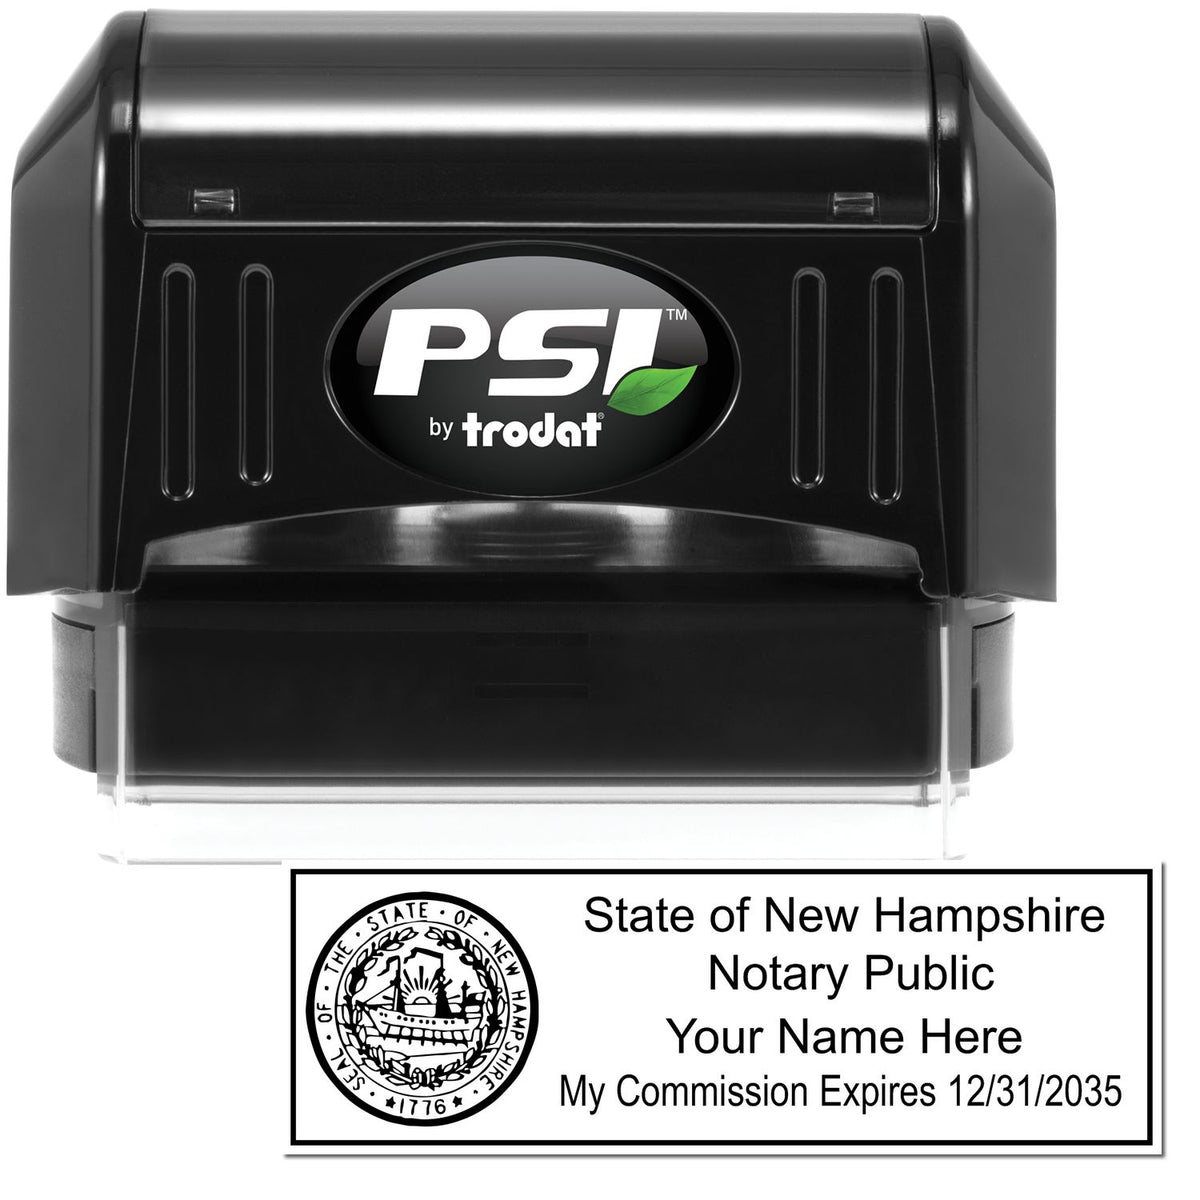 The main image for the PSI New Hampshire Notary Stamp depicting a sample of the imprint and electronic files